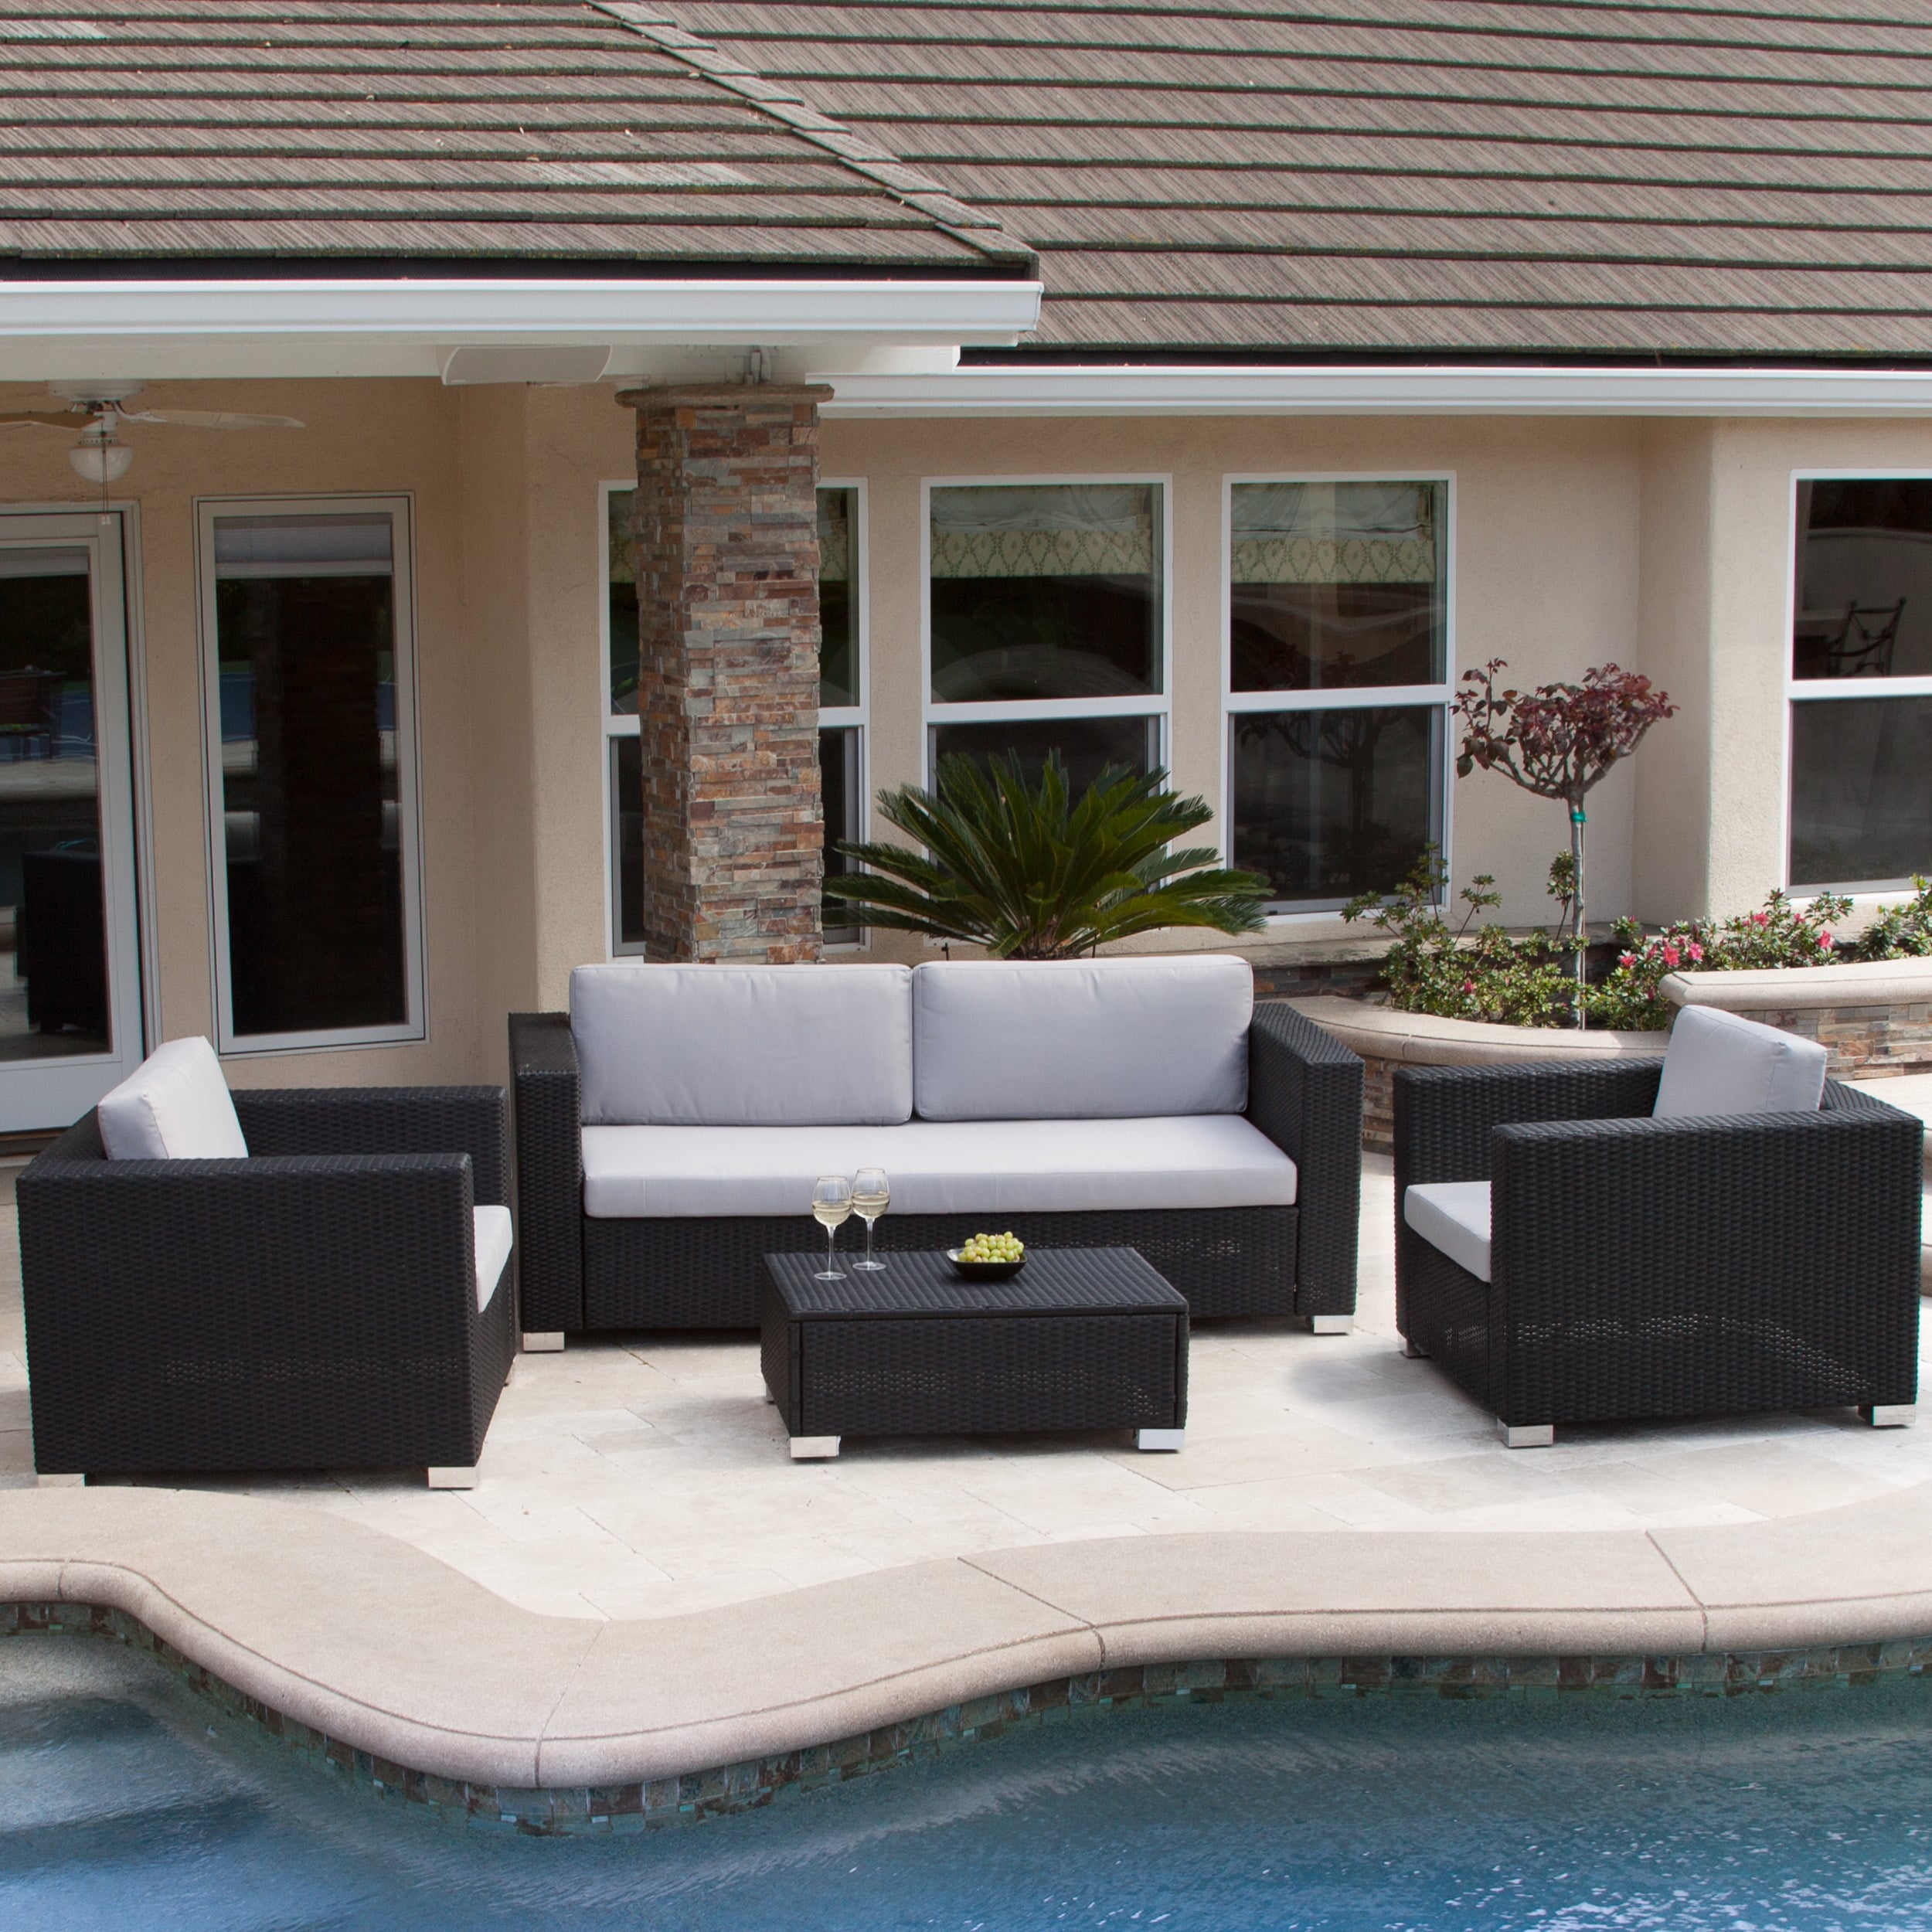 Iron Patio Furniture Buy Outdoor Furniture and Garden